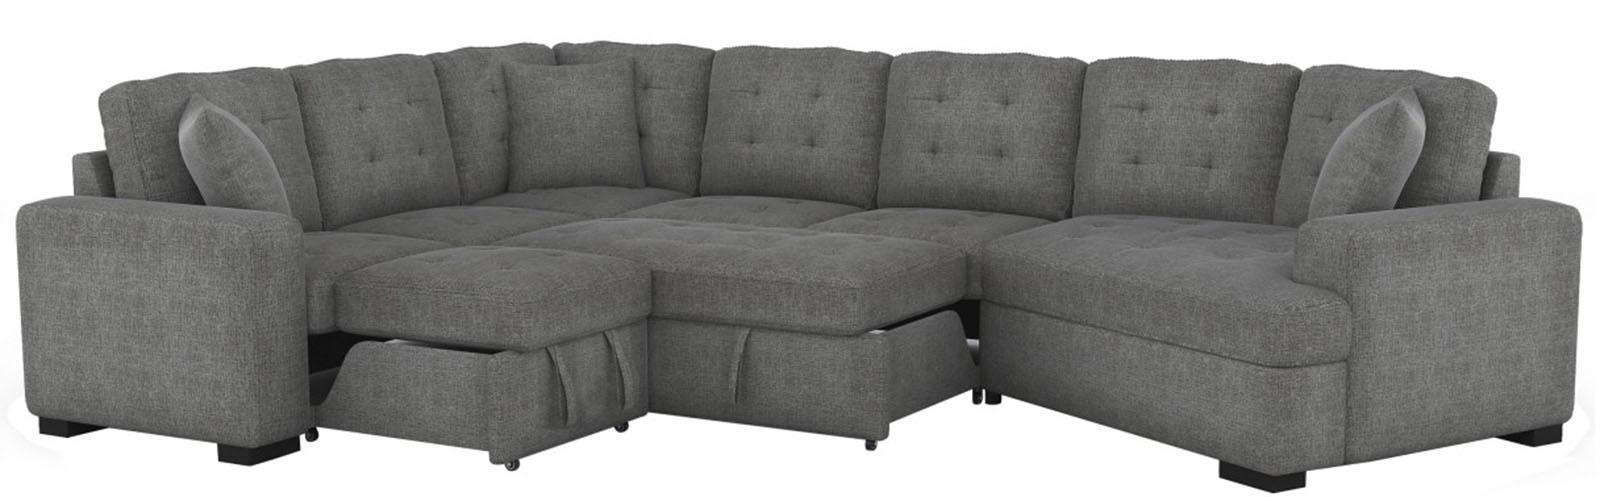 Homelegance Furniture Logansport Corner Seat with 1 Pillow in Gray 9401GRY-CR